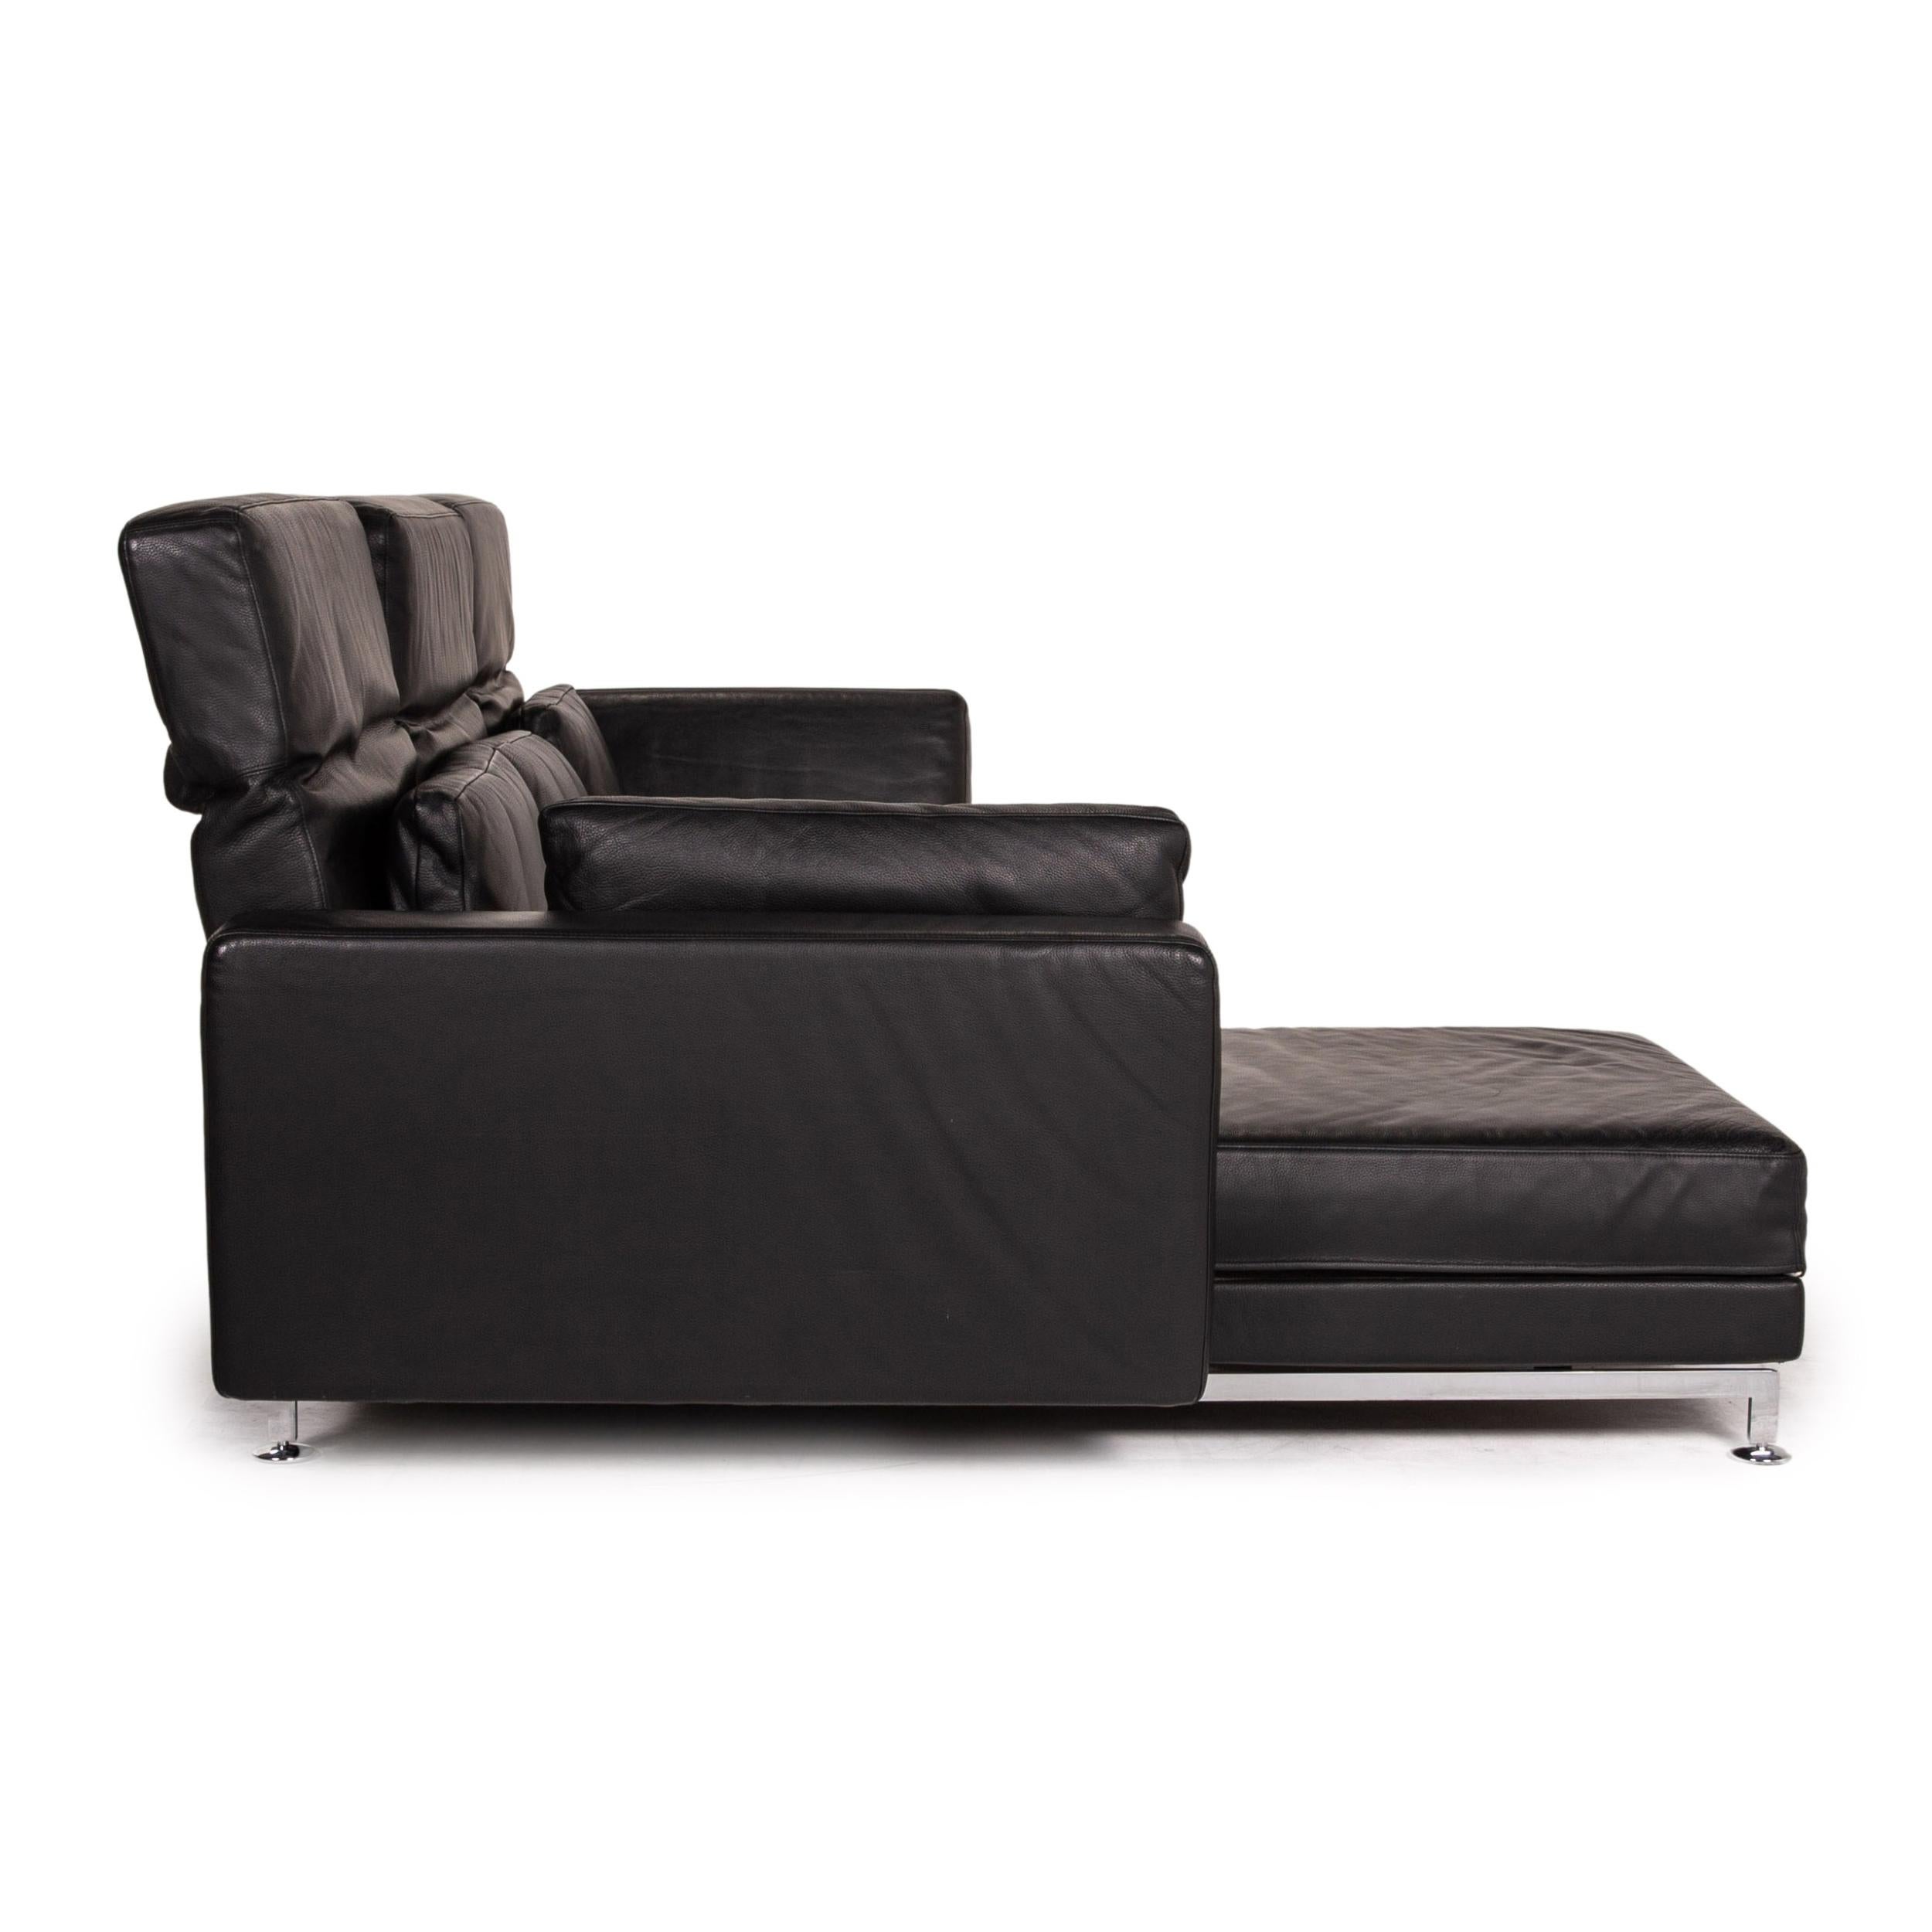 Brühl & Sippold Moule Leather Corner Sofa Black Function Relax Function Couch 5